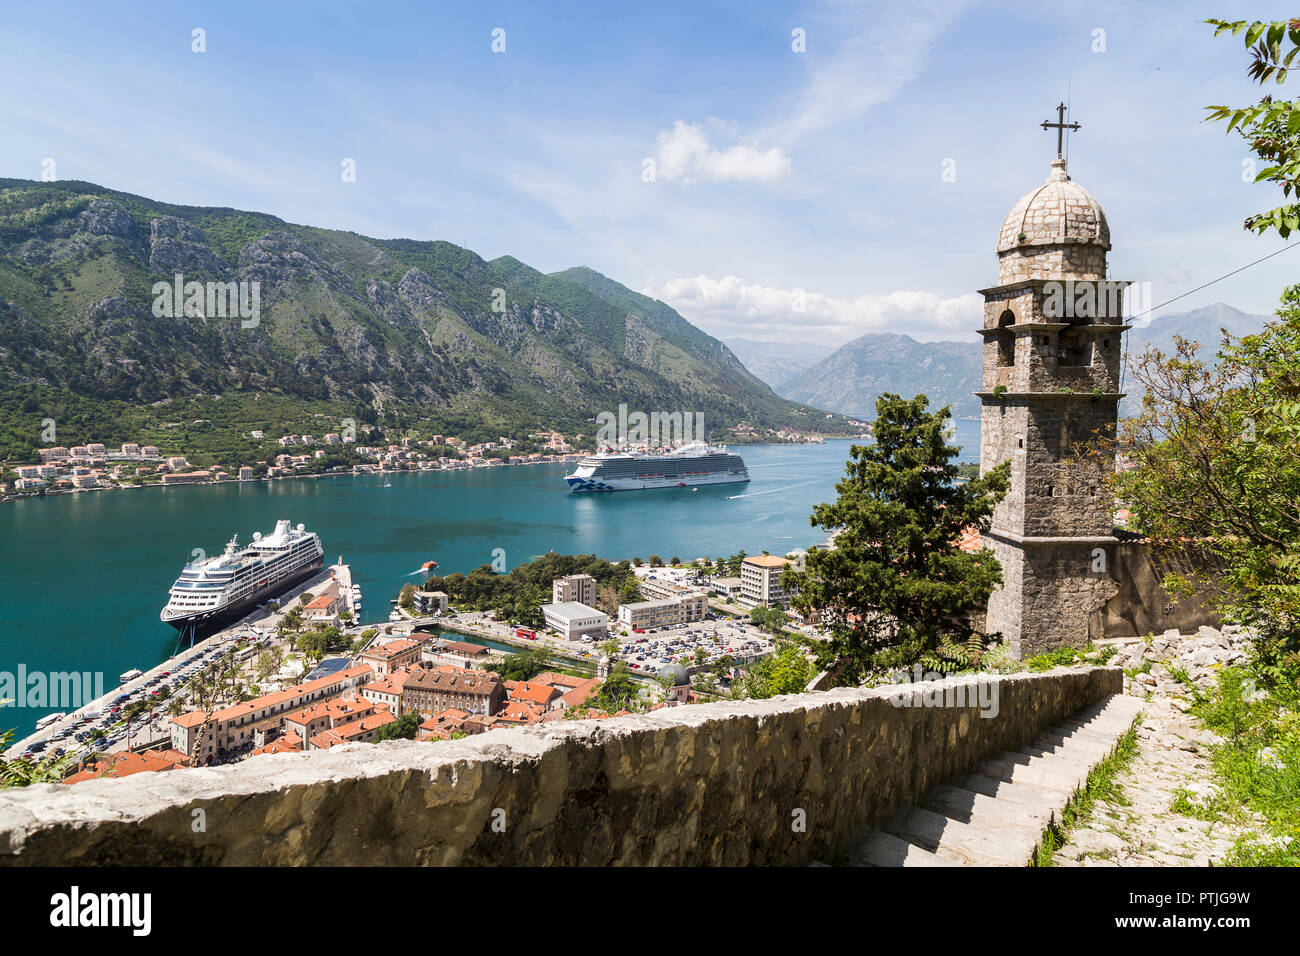 Cruise ships moored in the port of Kotor. Stock Photo